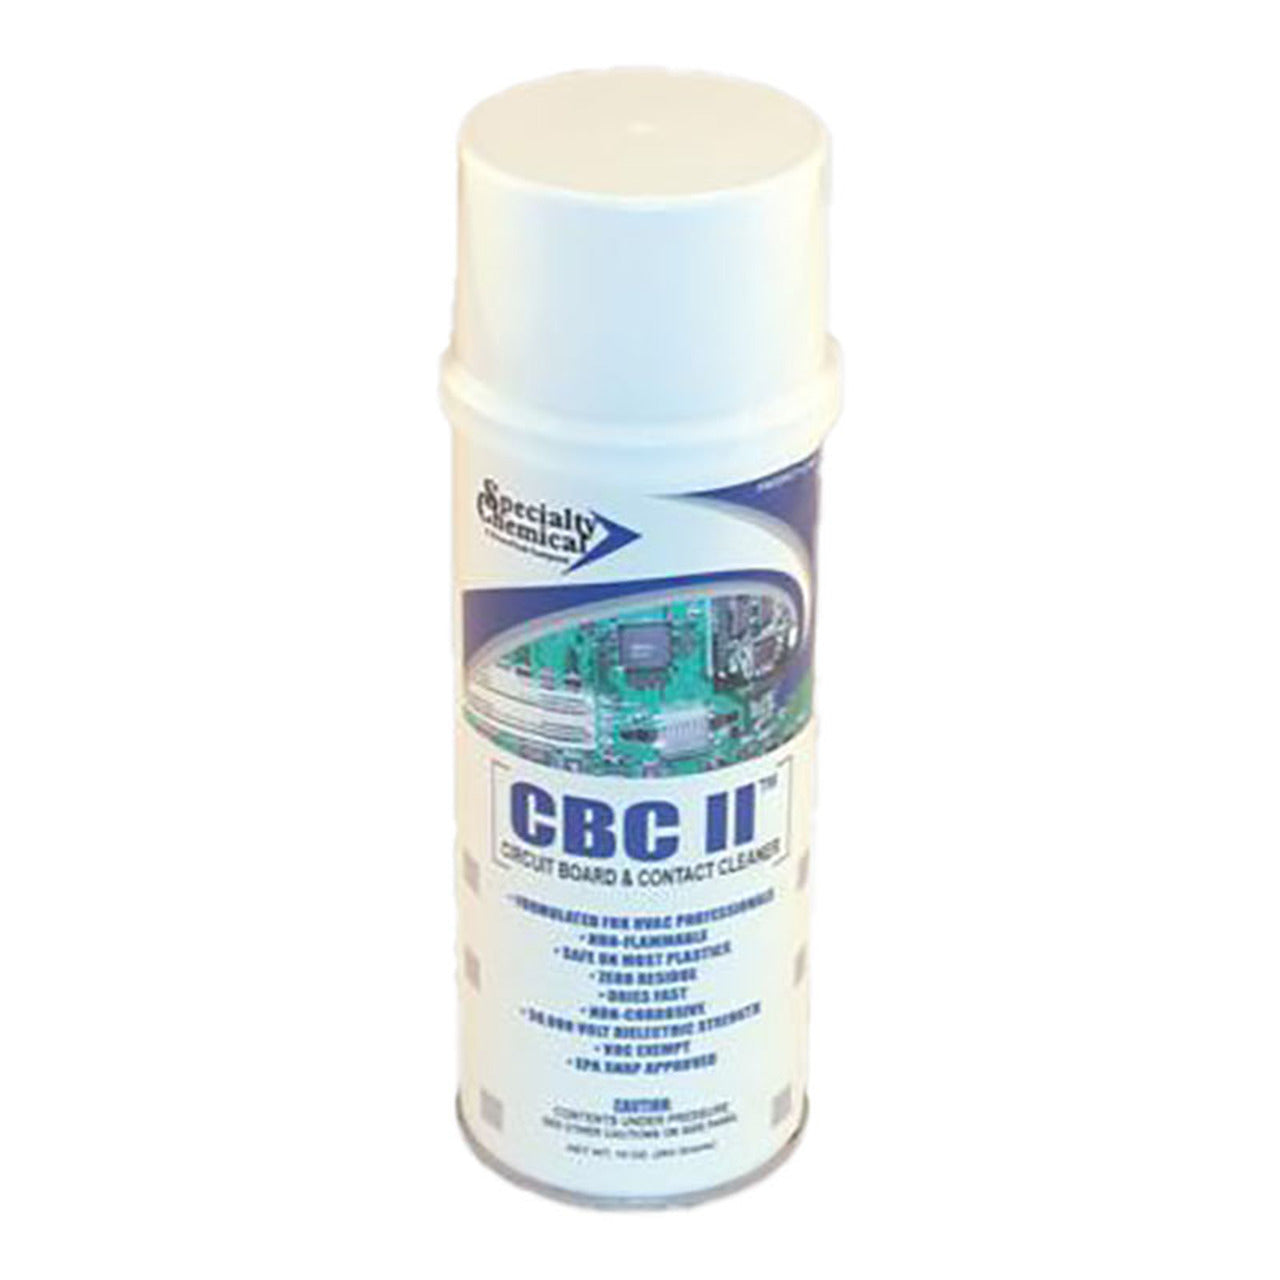 Diversitech - Circuit Board & Contact Cleaner; CBC II